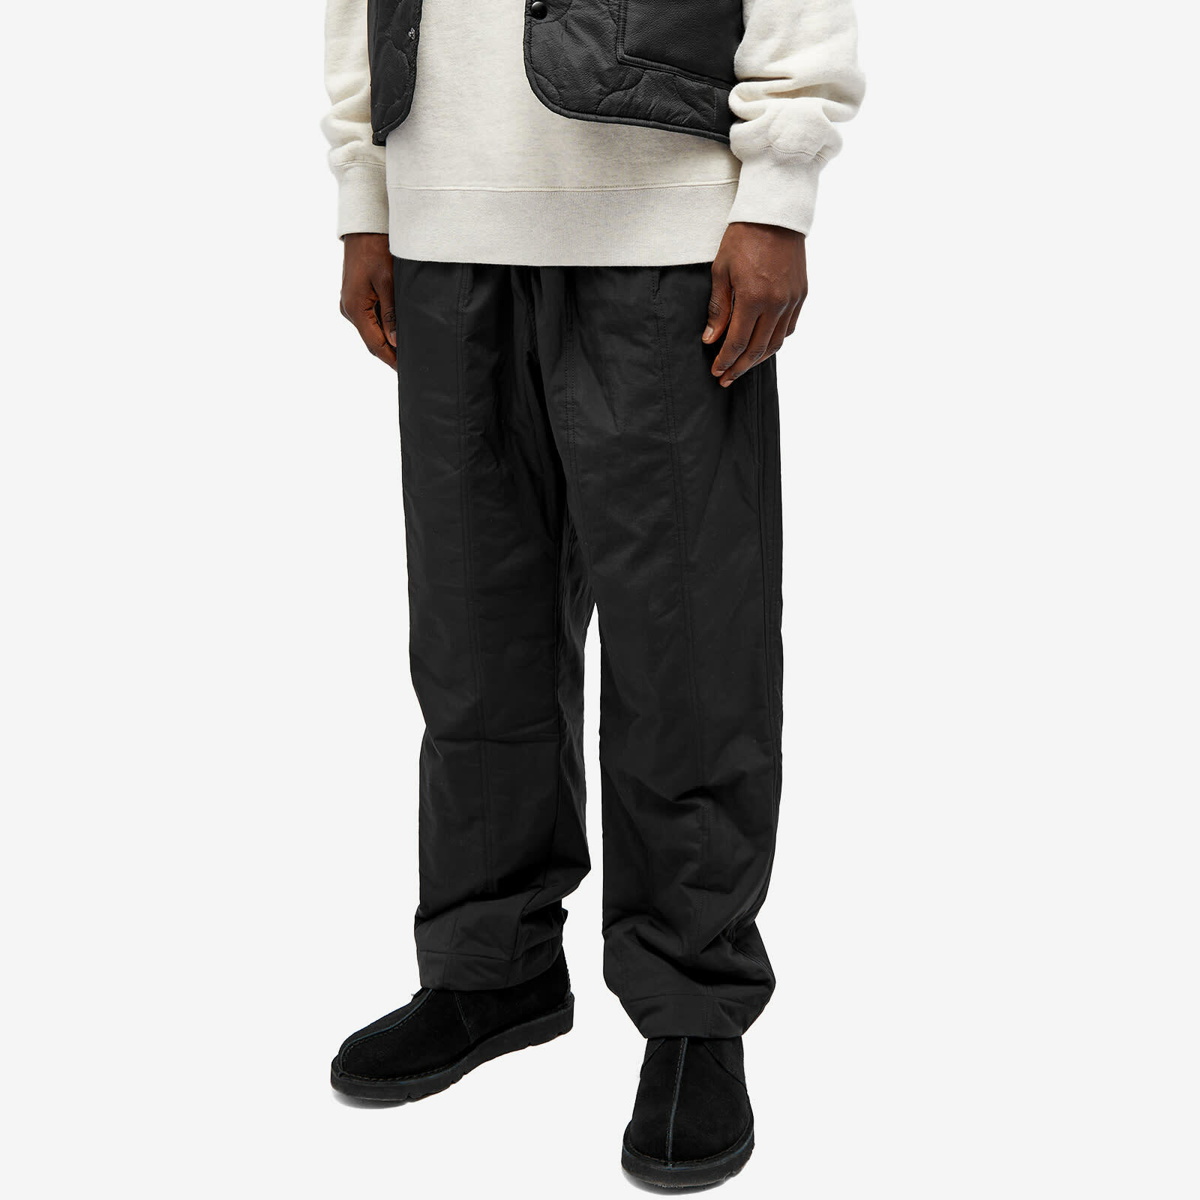 s.k manor hill Men's Nest Pant in Black Quilted Nylon